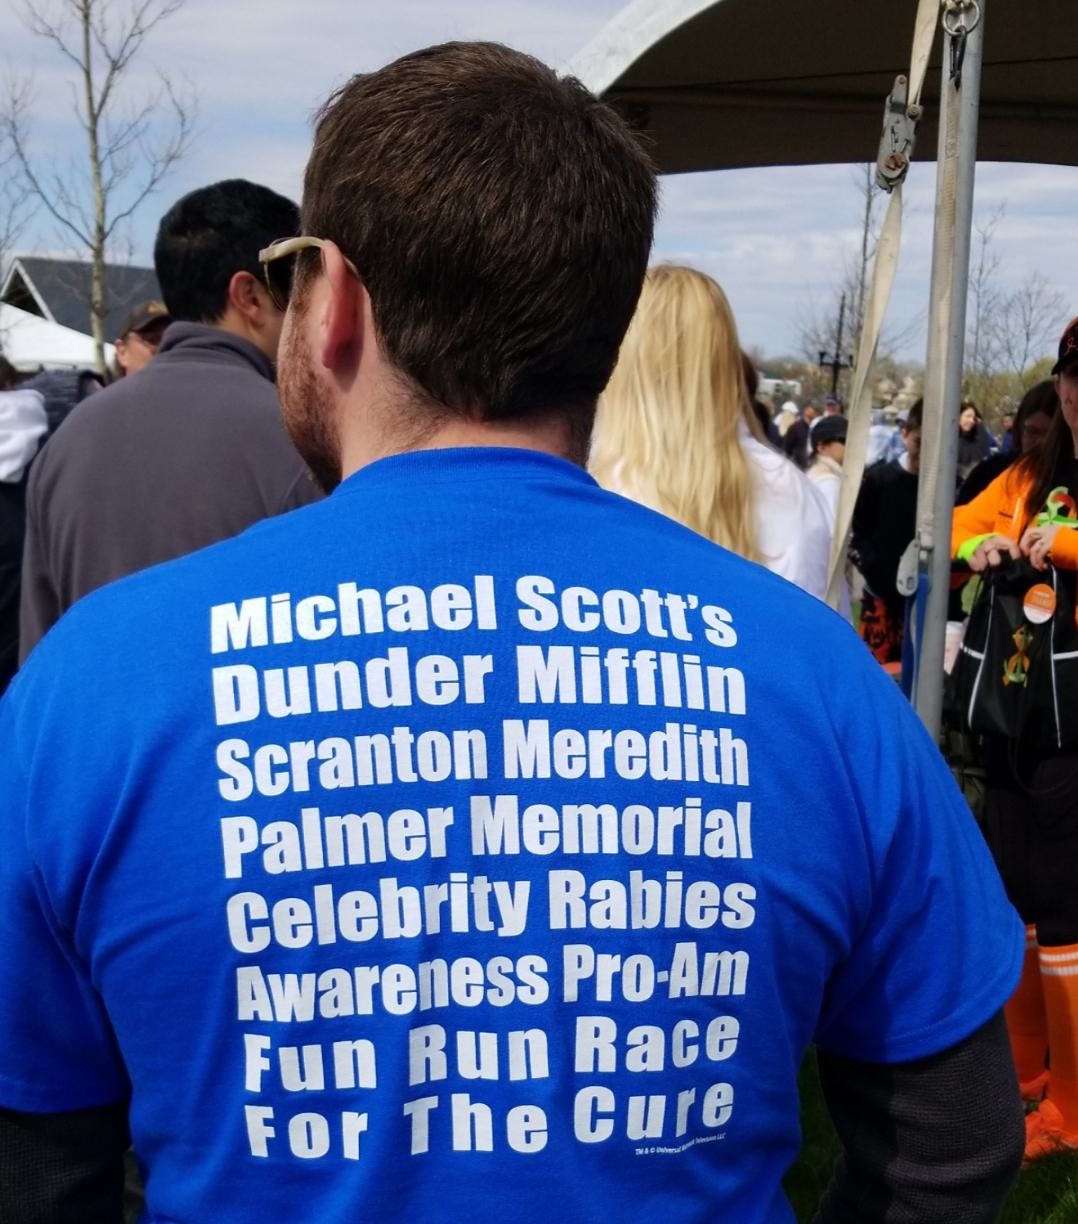 I was disappointed only a few people got my shirt at a recent 5k.